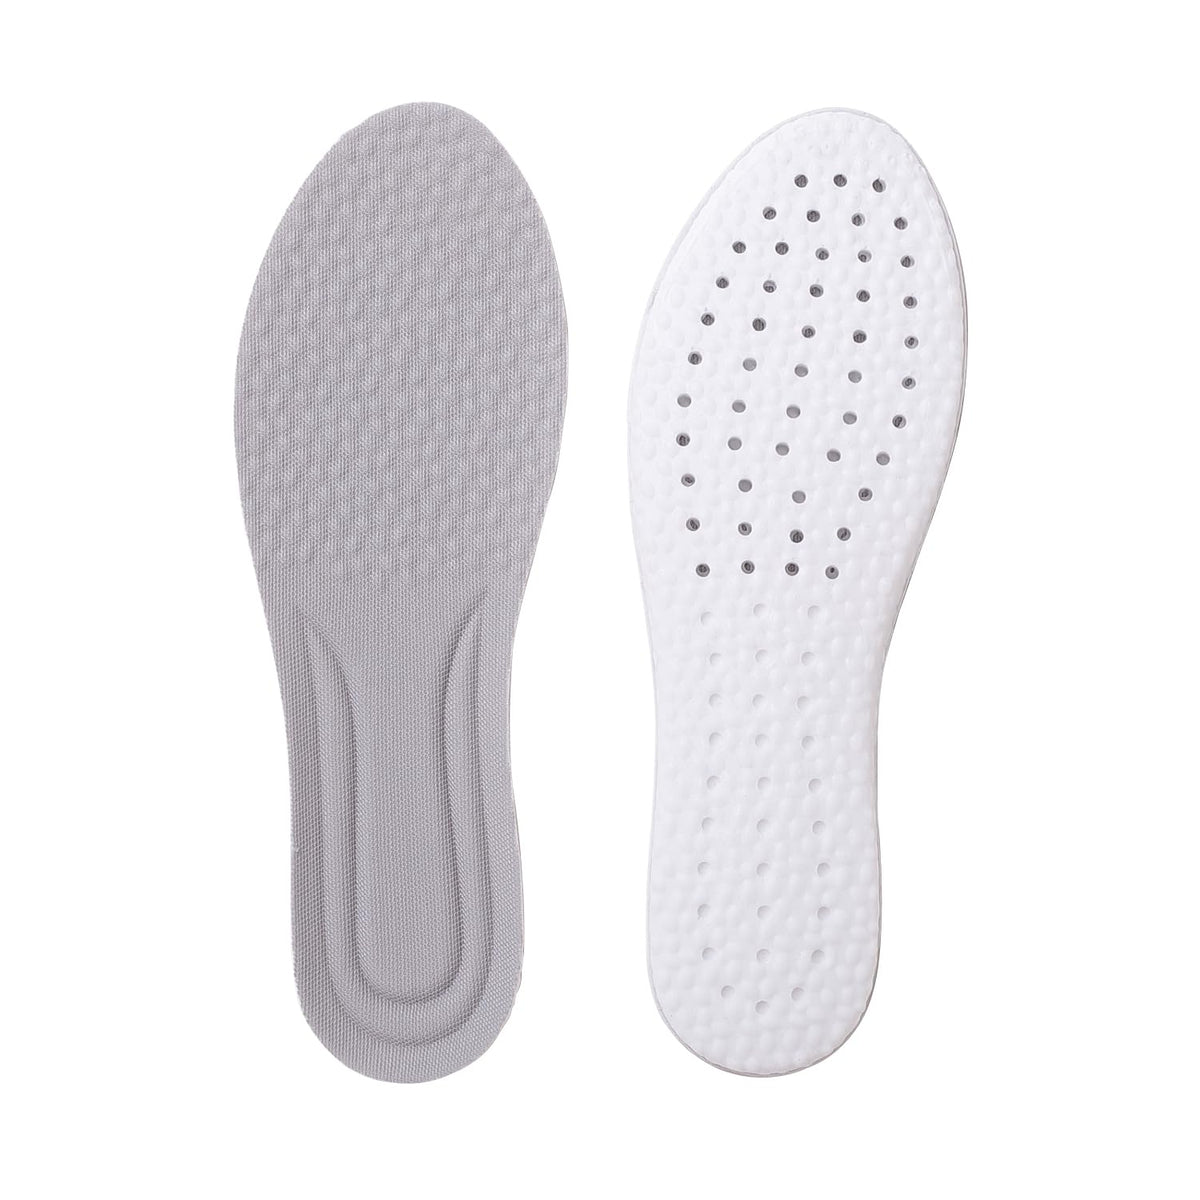 Dr Foot Air-Pillow® Insoles | Comfortable, Porous, and Breathable Insoles for Sports | Shock Absorption for Reduced Impact | Soothing Sensation | Relieves Foot Fatigue | - 1 Pair - (Large Size)